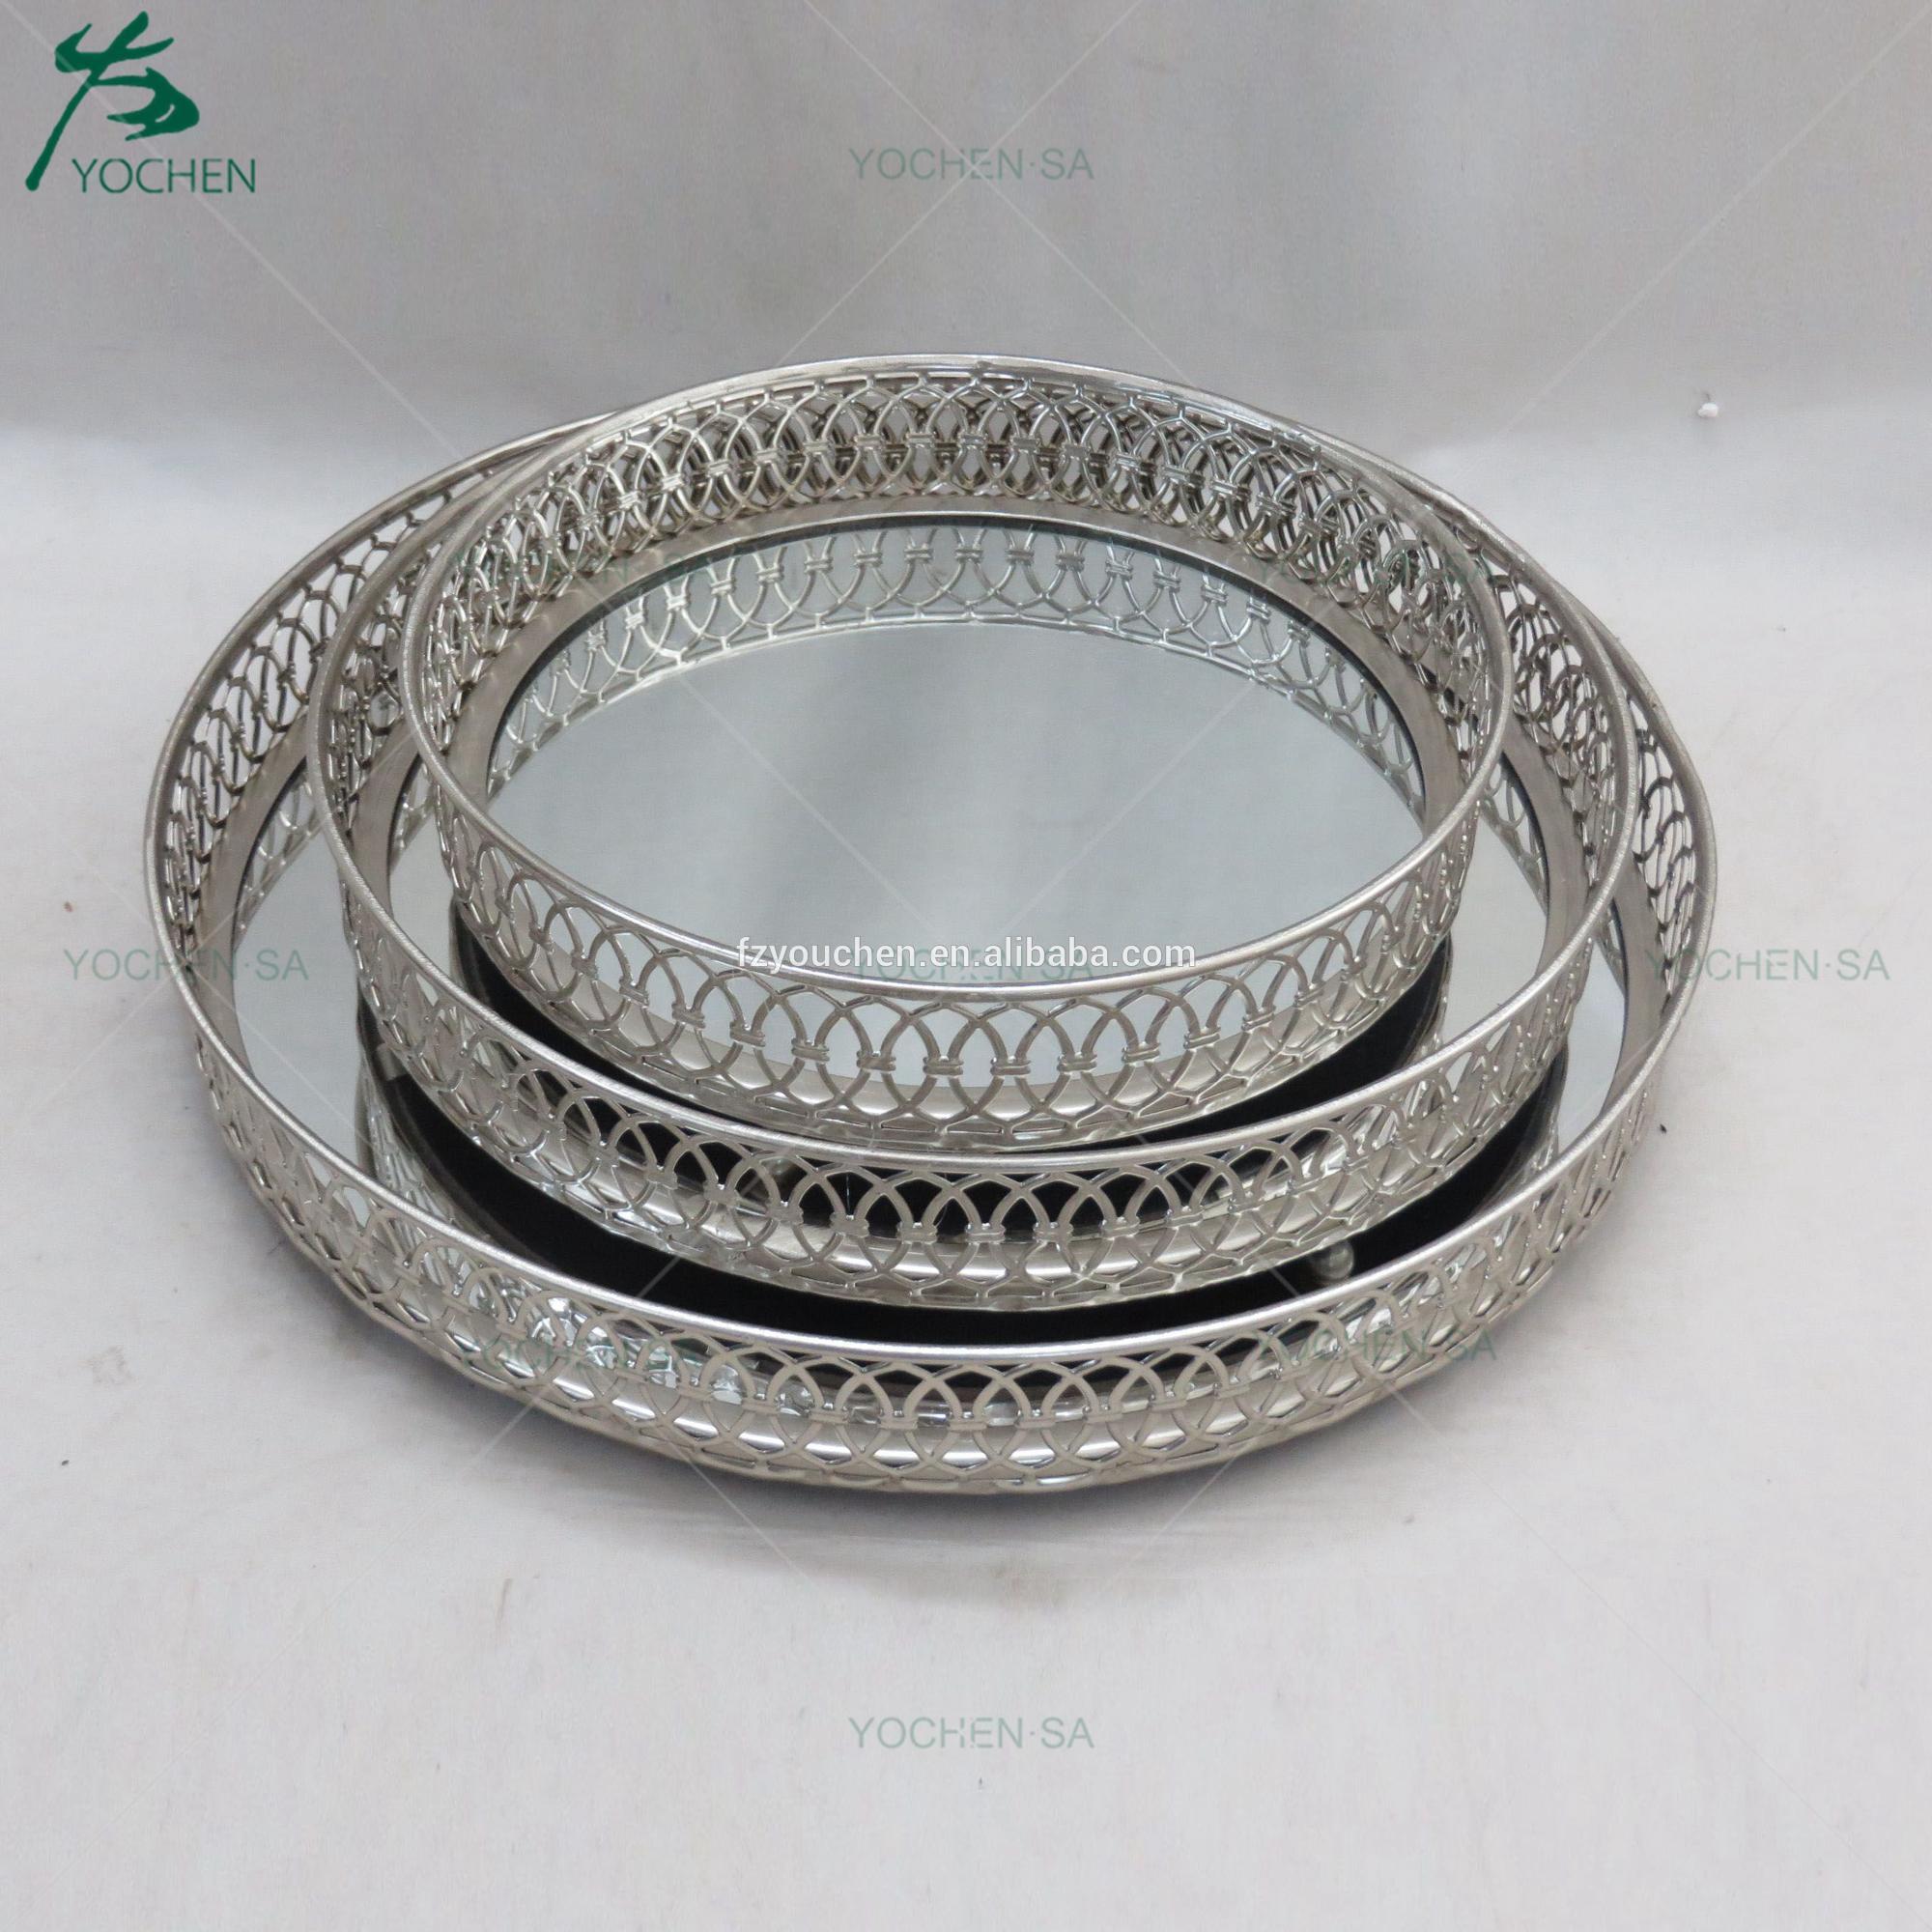 Round Silver Metal Mirored Serving Candle Plated Tray